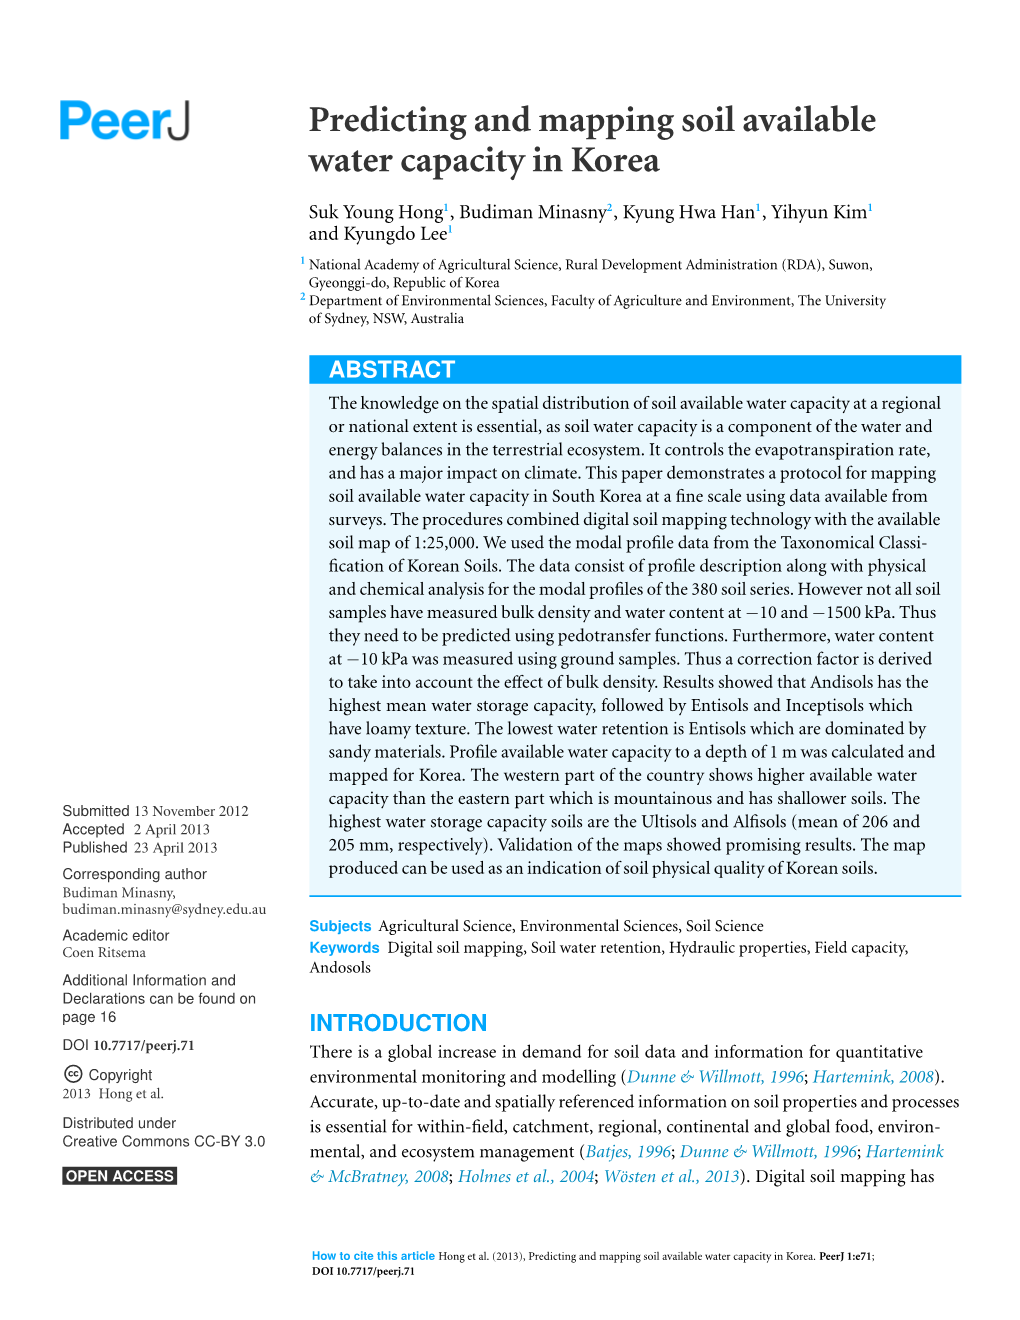 Predicting and Mapping Soil Available Water Capacity in Korea